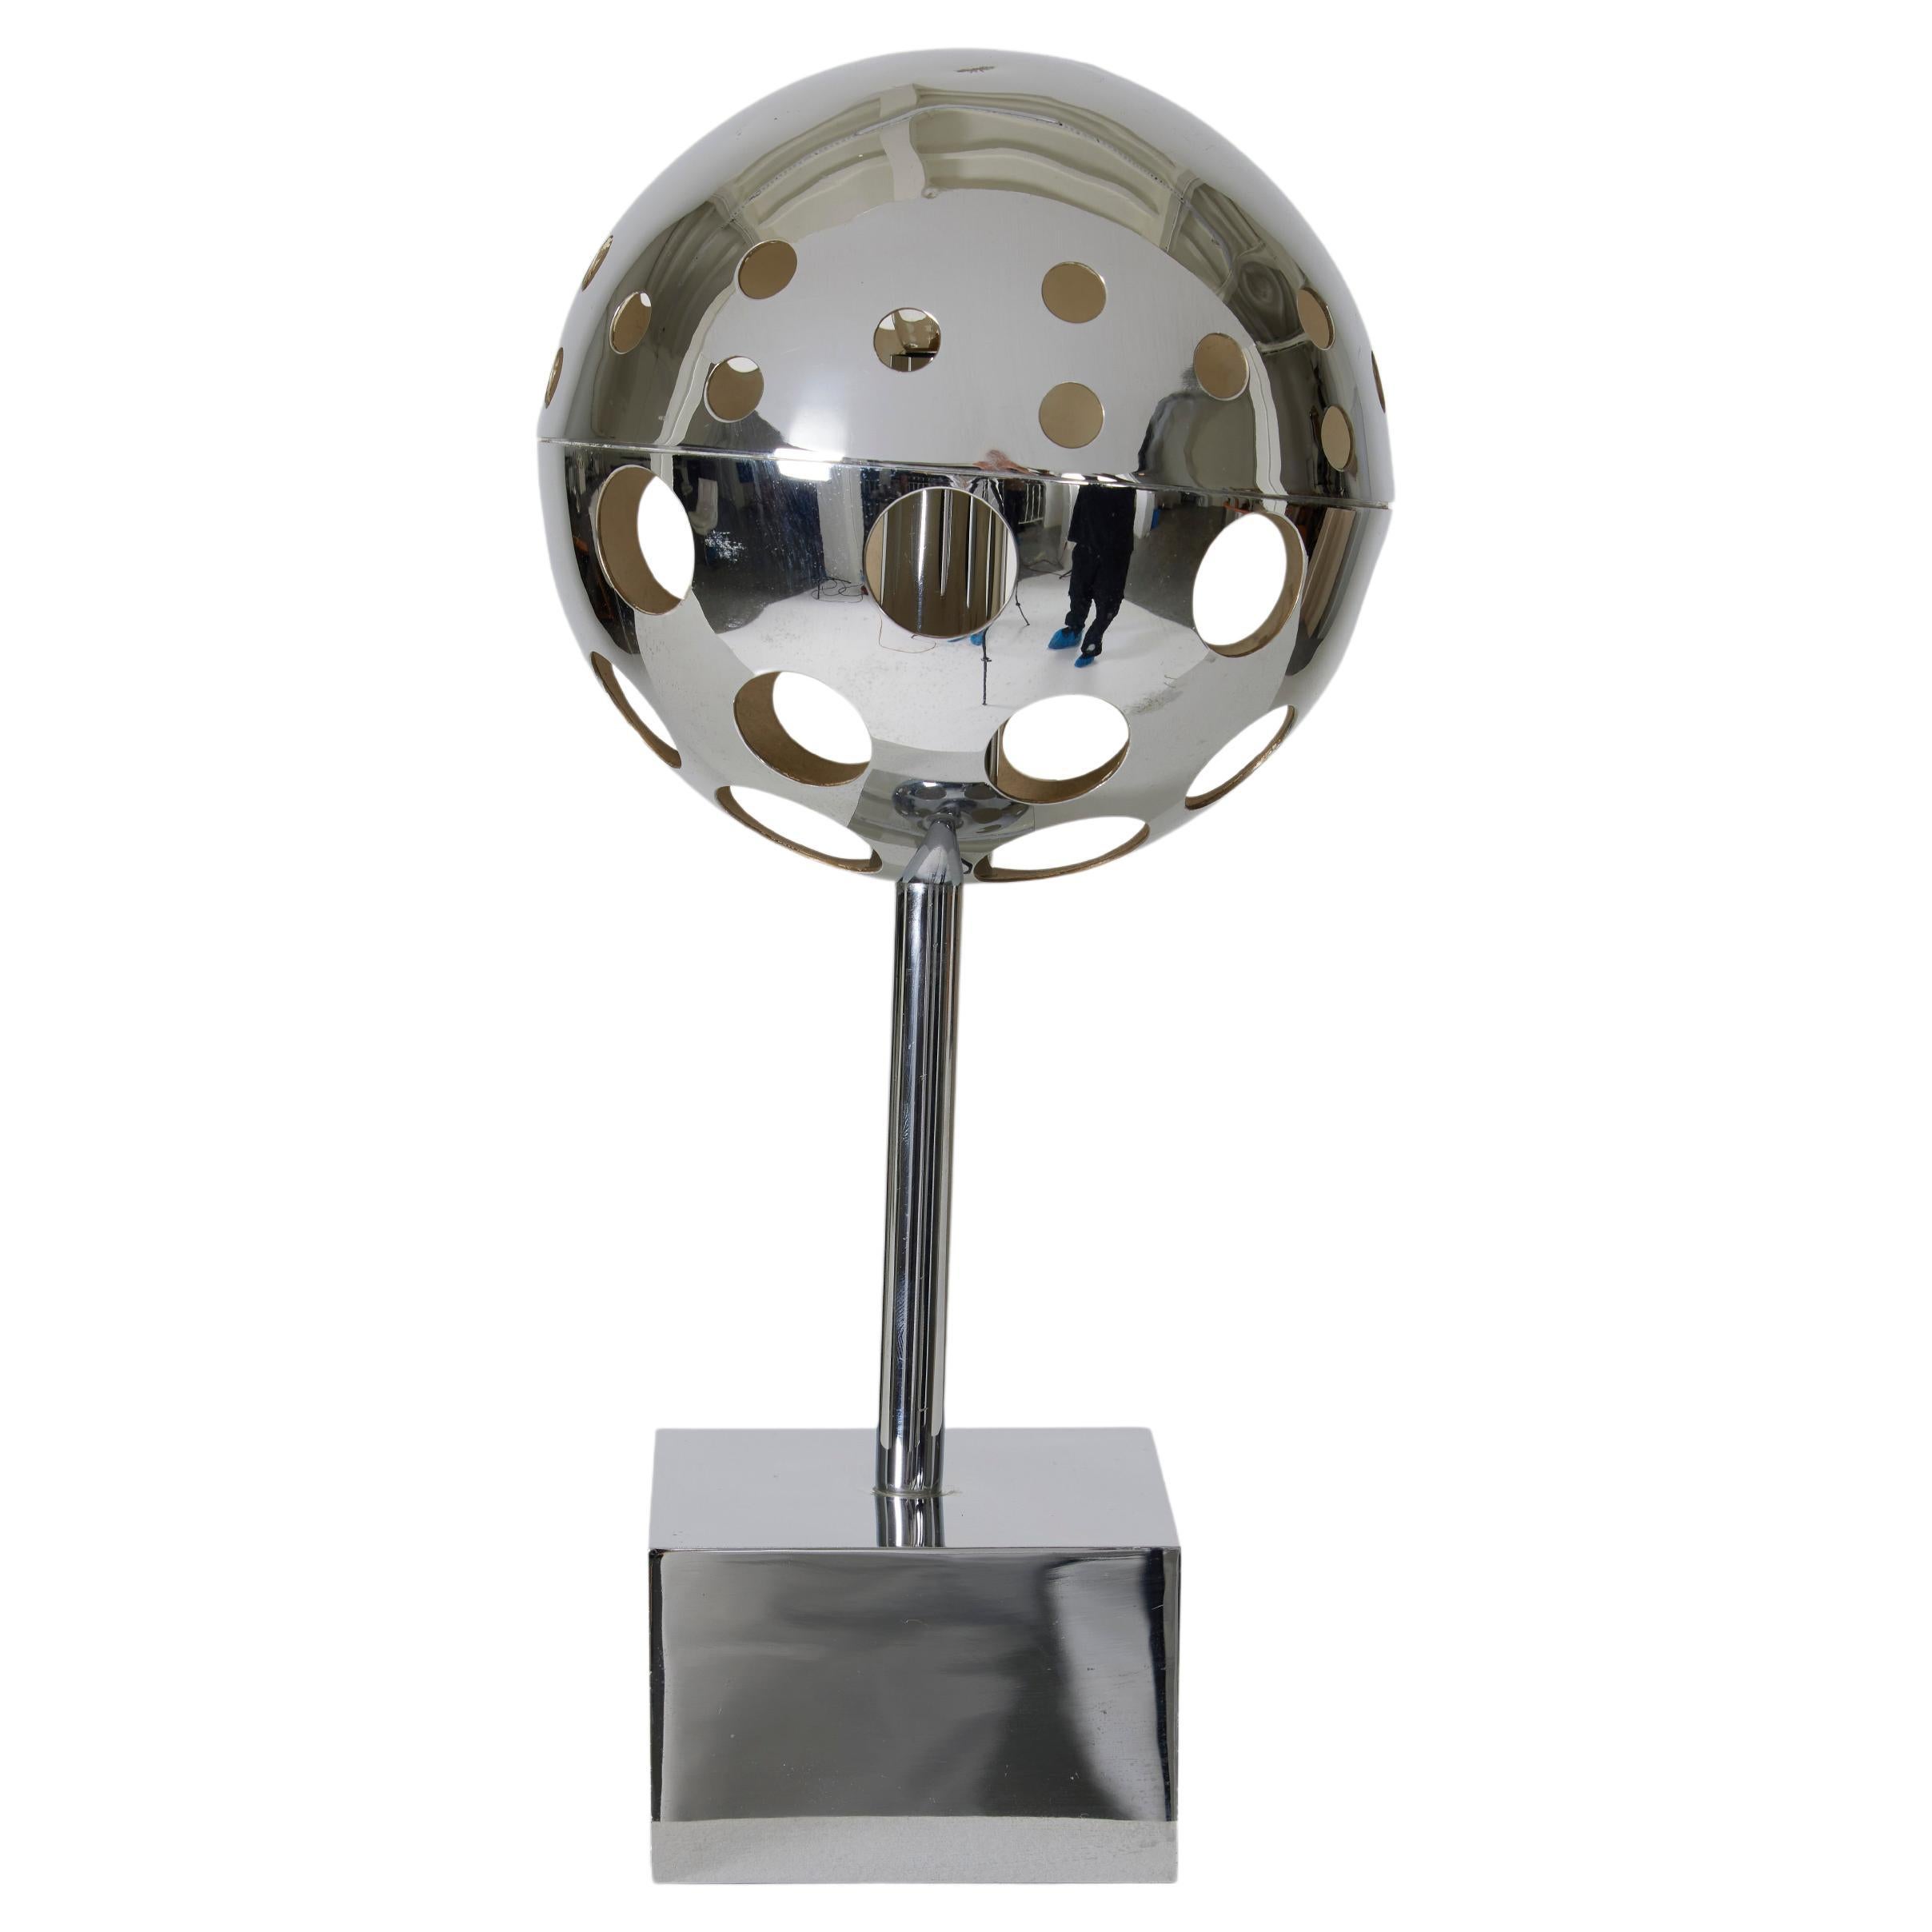 Chrome metal lamp by French designer Sabine Charoy, mid-20th century